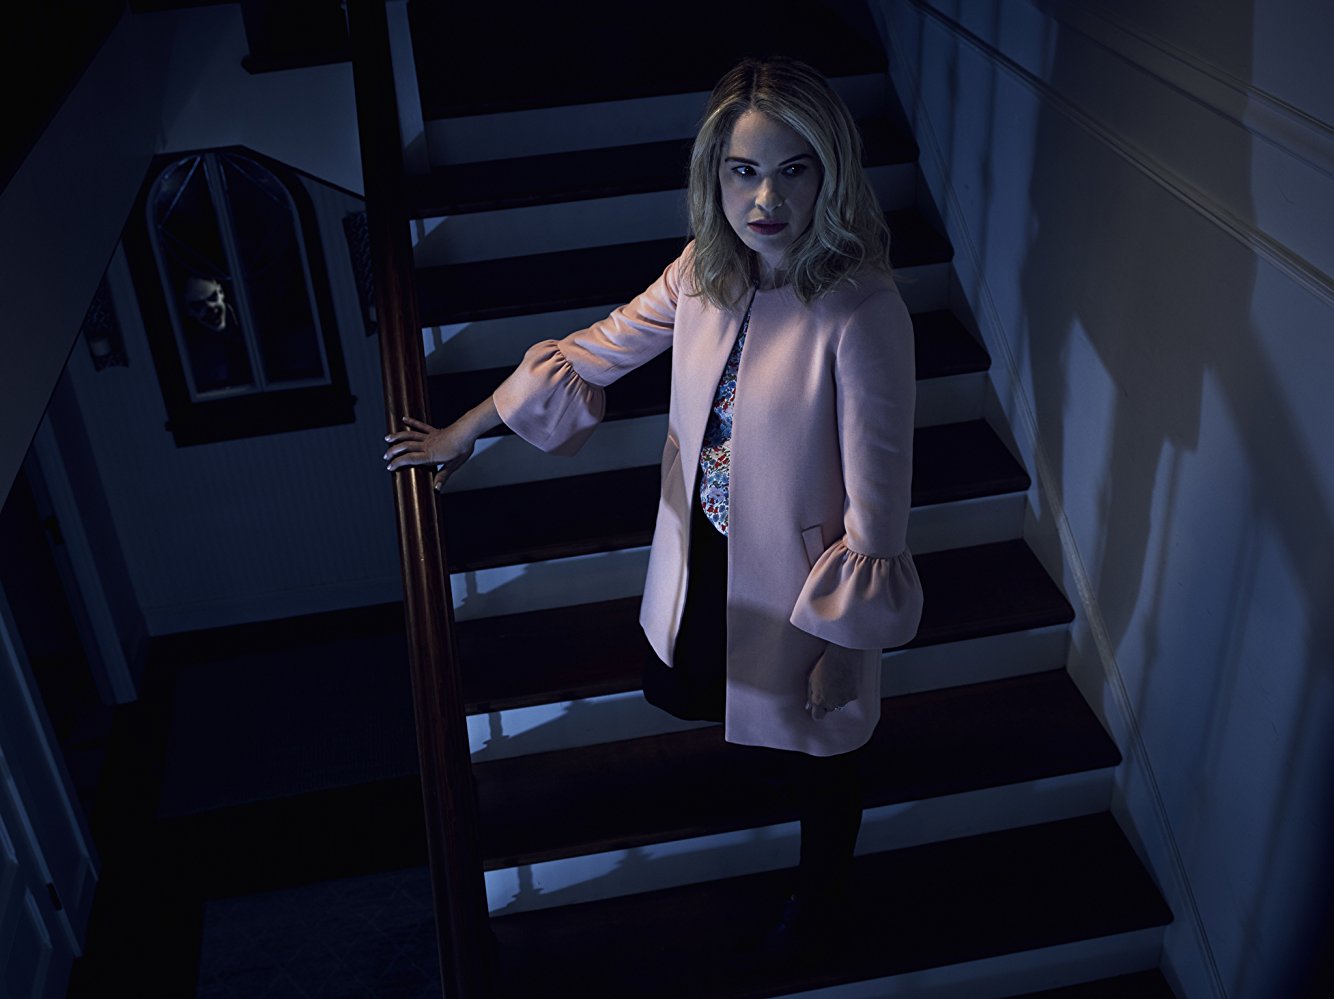 American Horror Story Cult Season 7 Trailers Clips Images And Posters The Entertainment